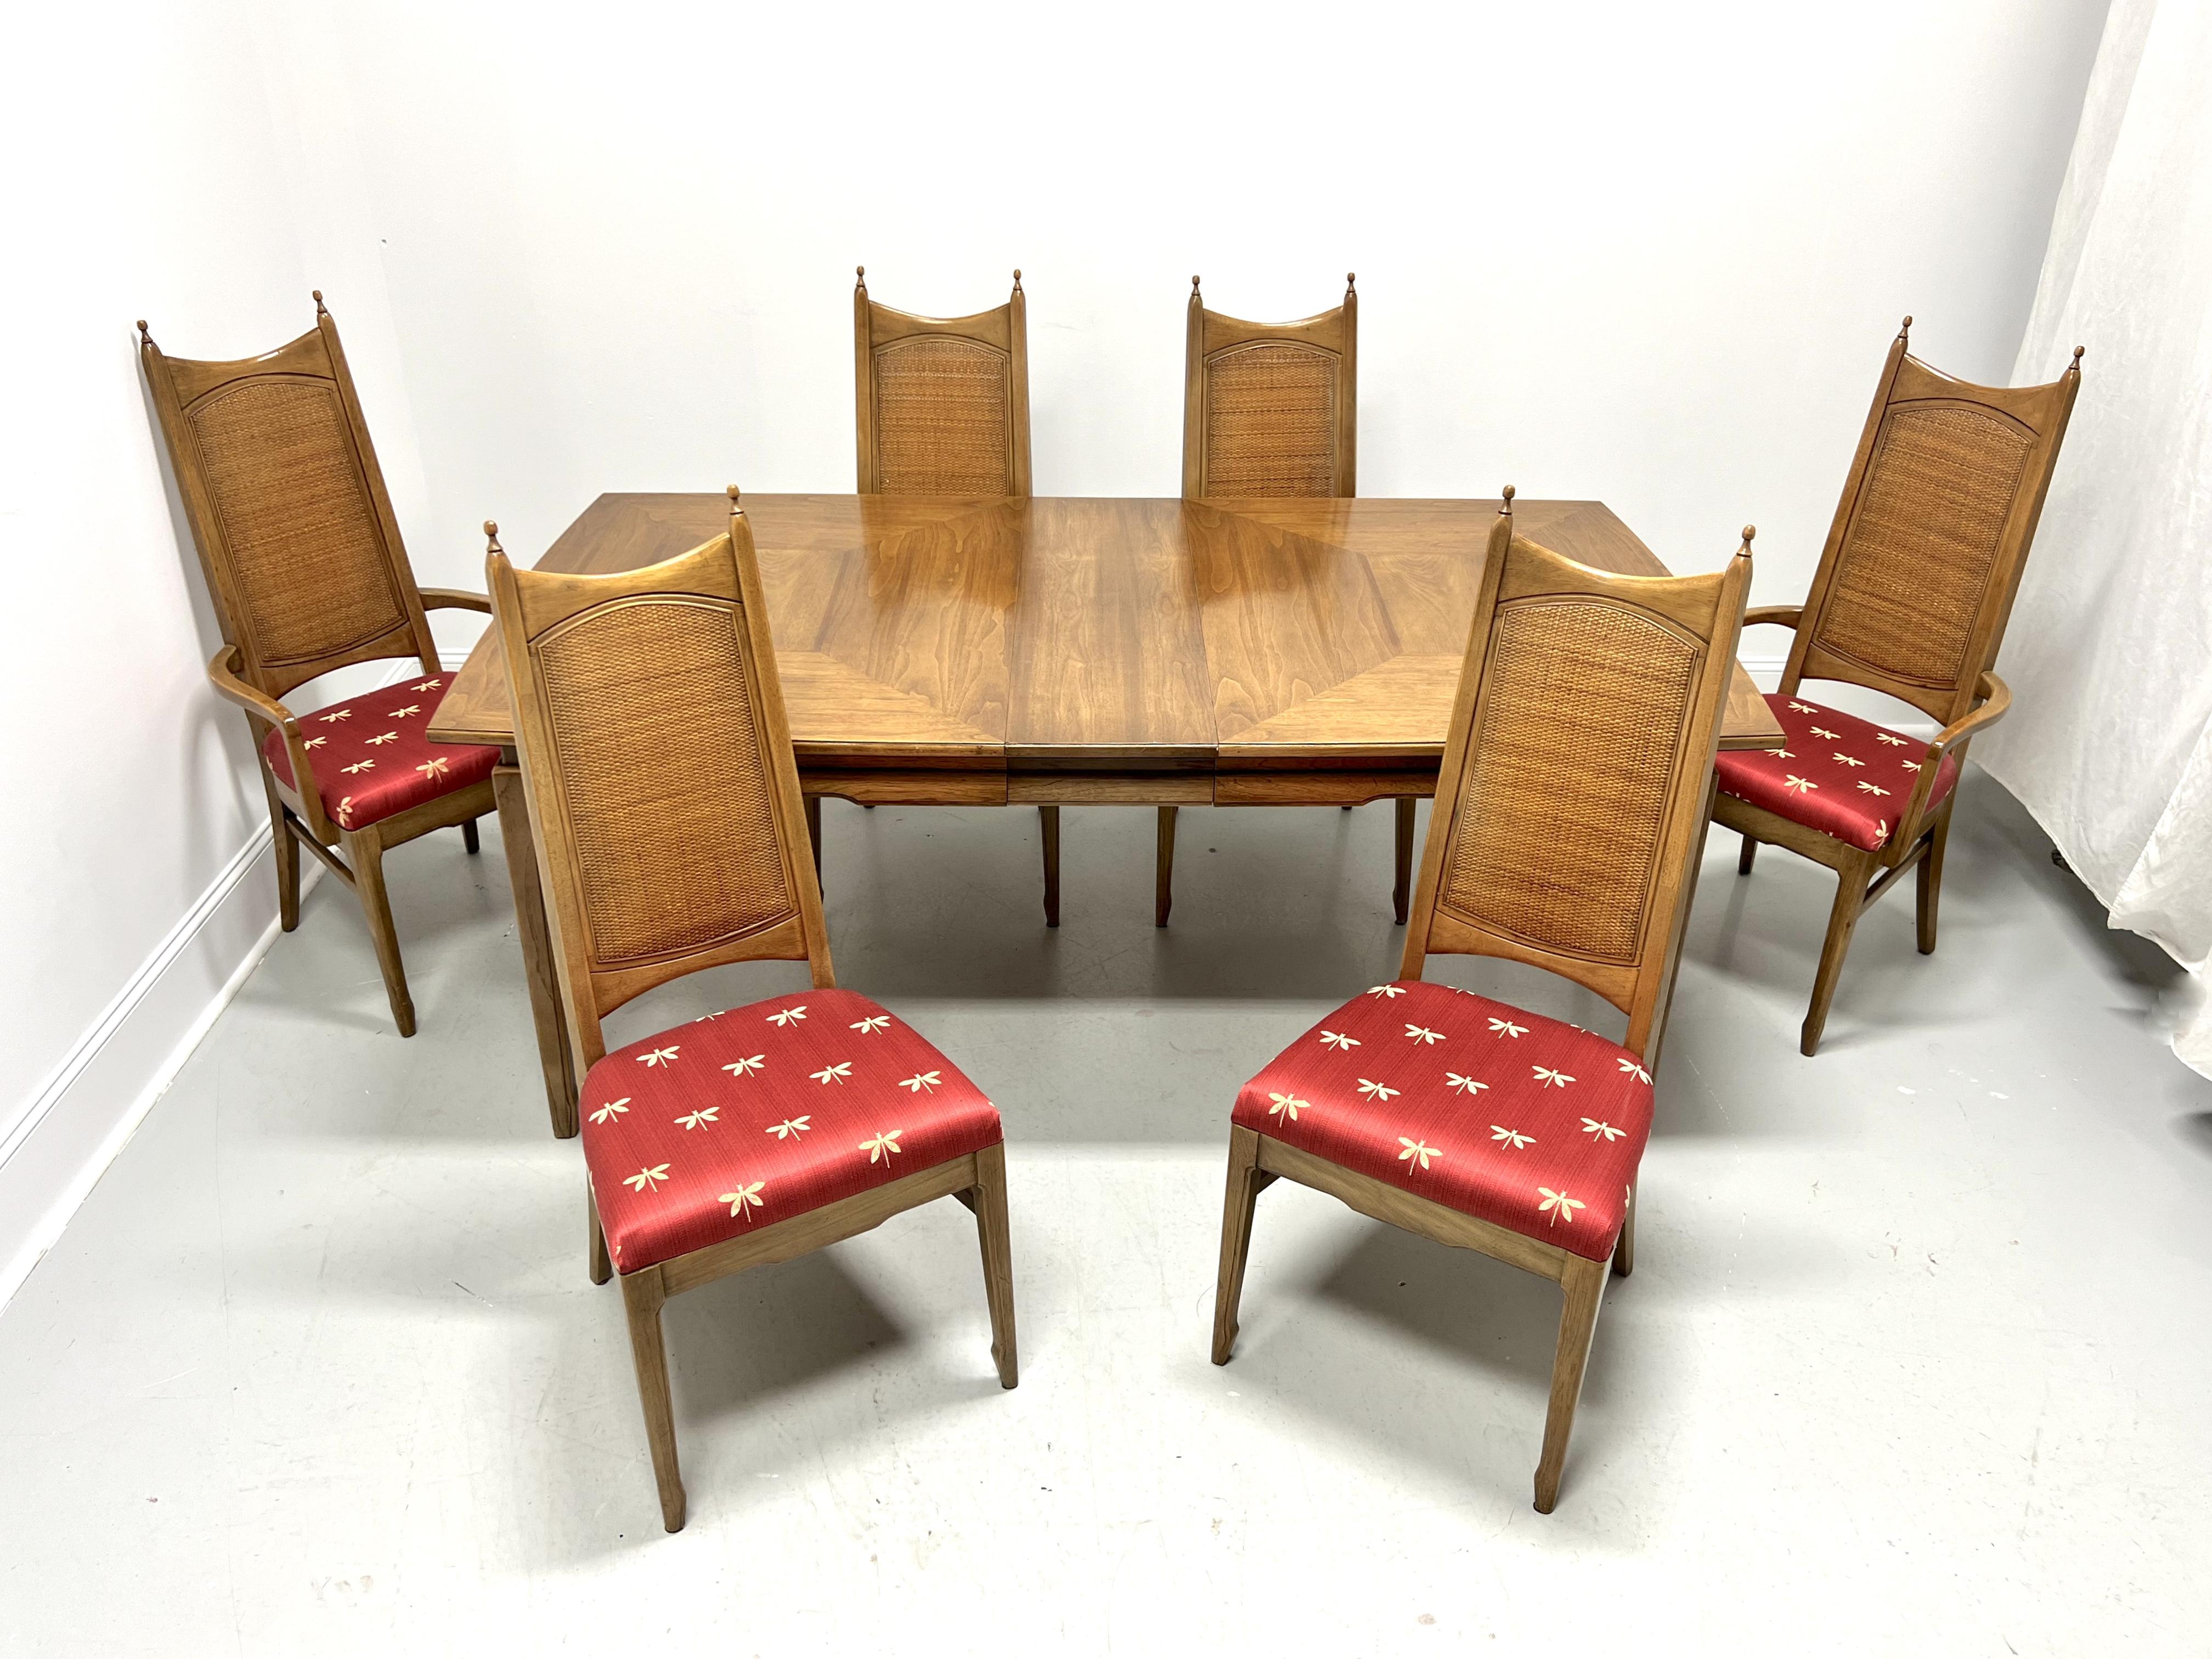 THOMASVILLE Pecan Mid 20th Century Modern MCM Dining Table Set with 6 Chairs For Sale 10